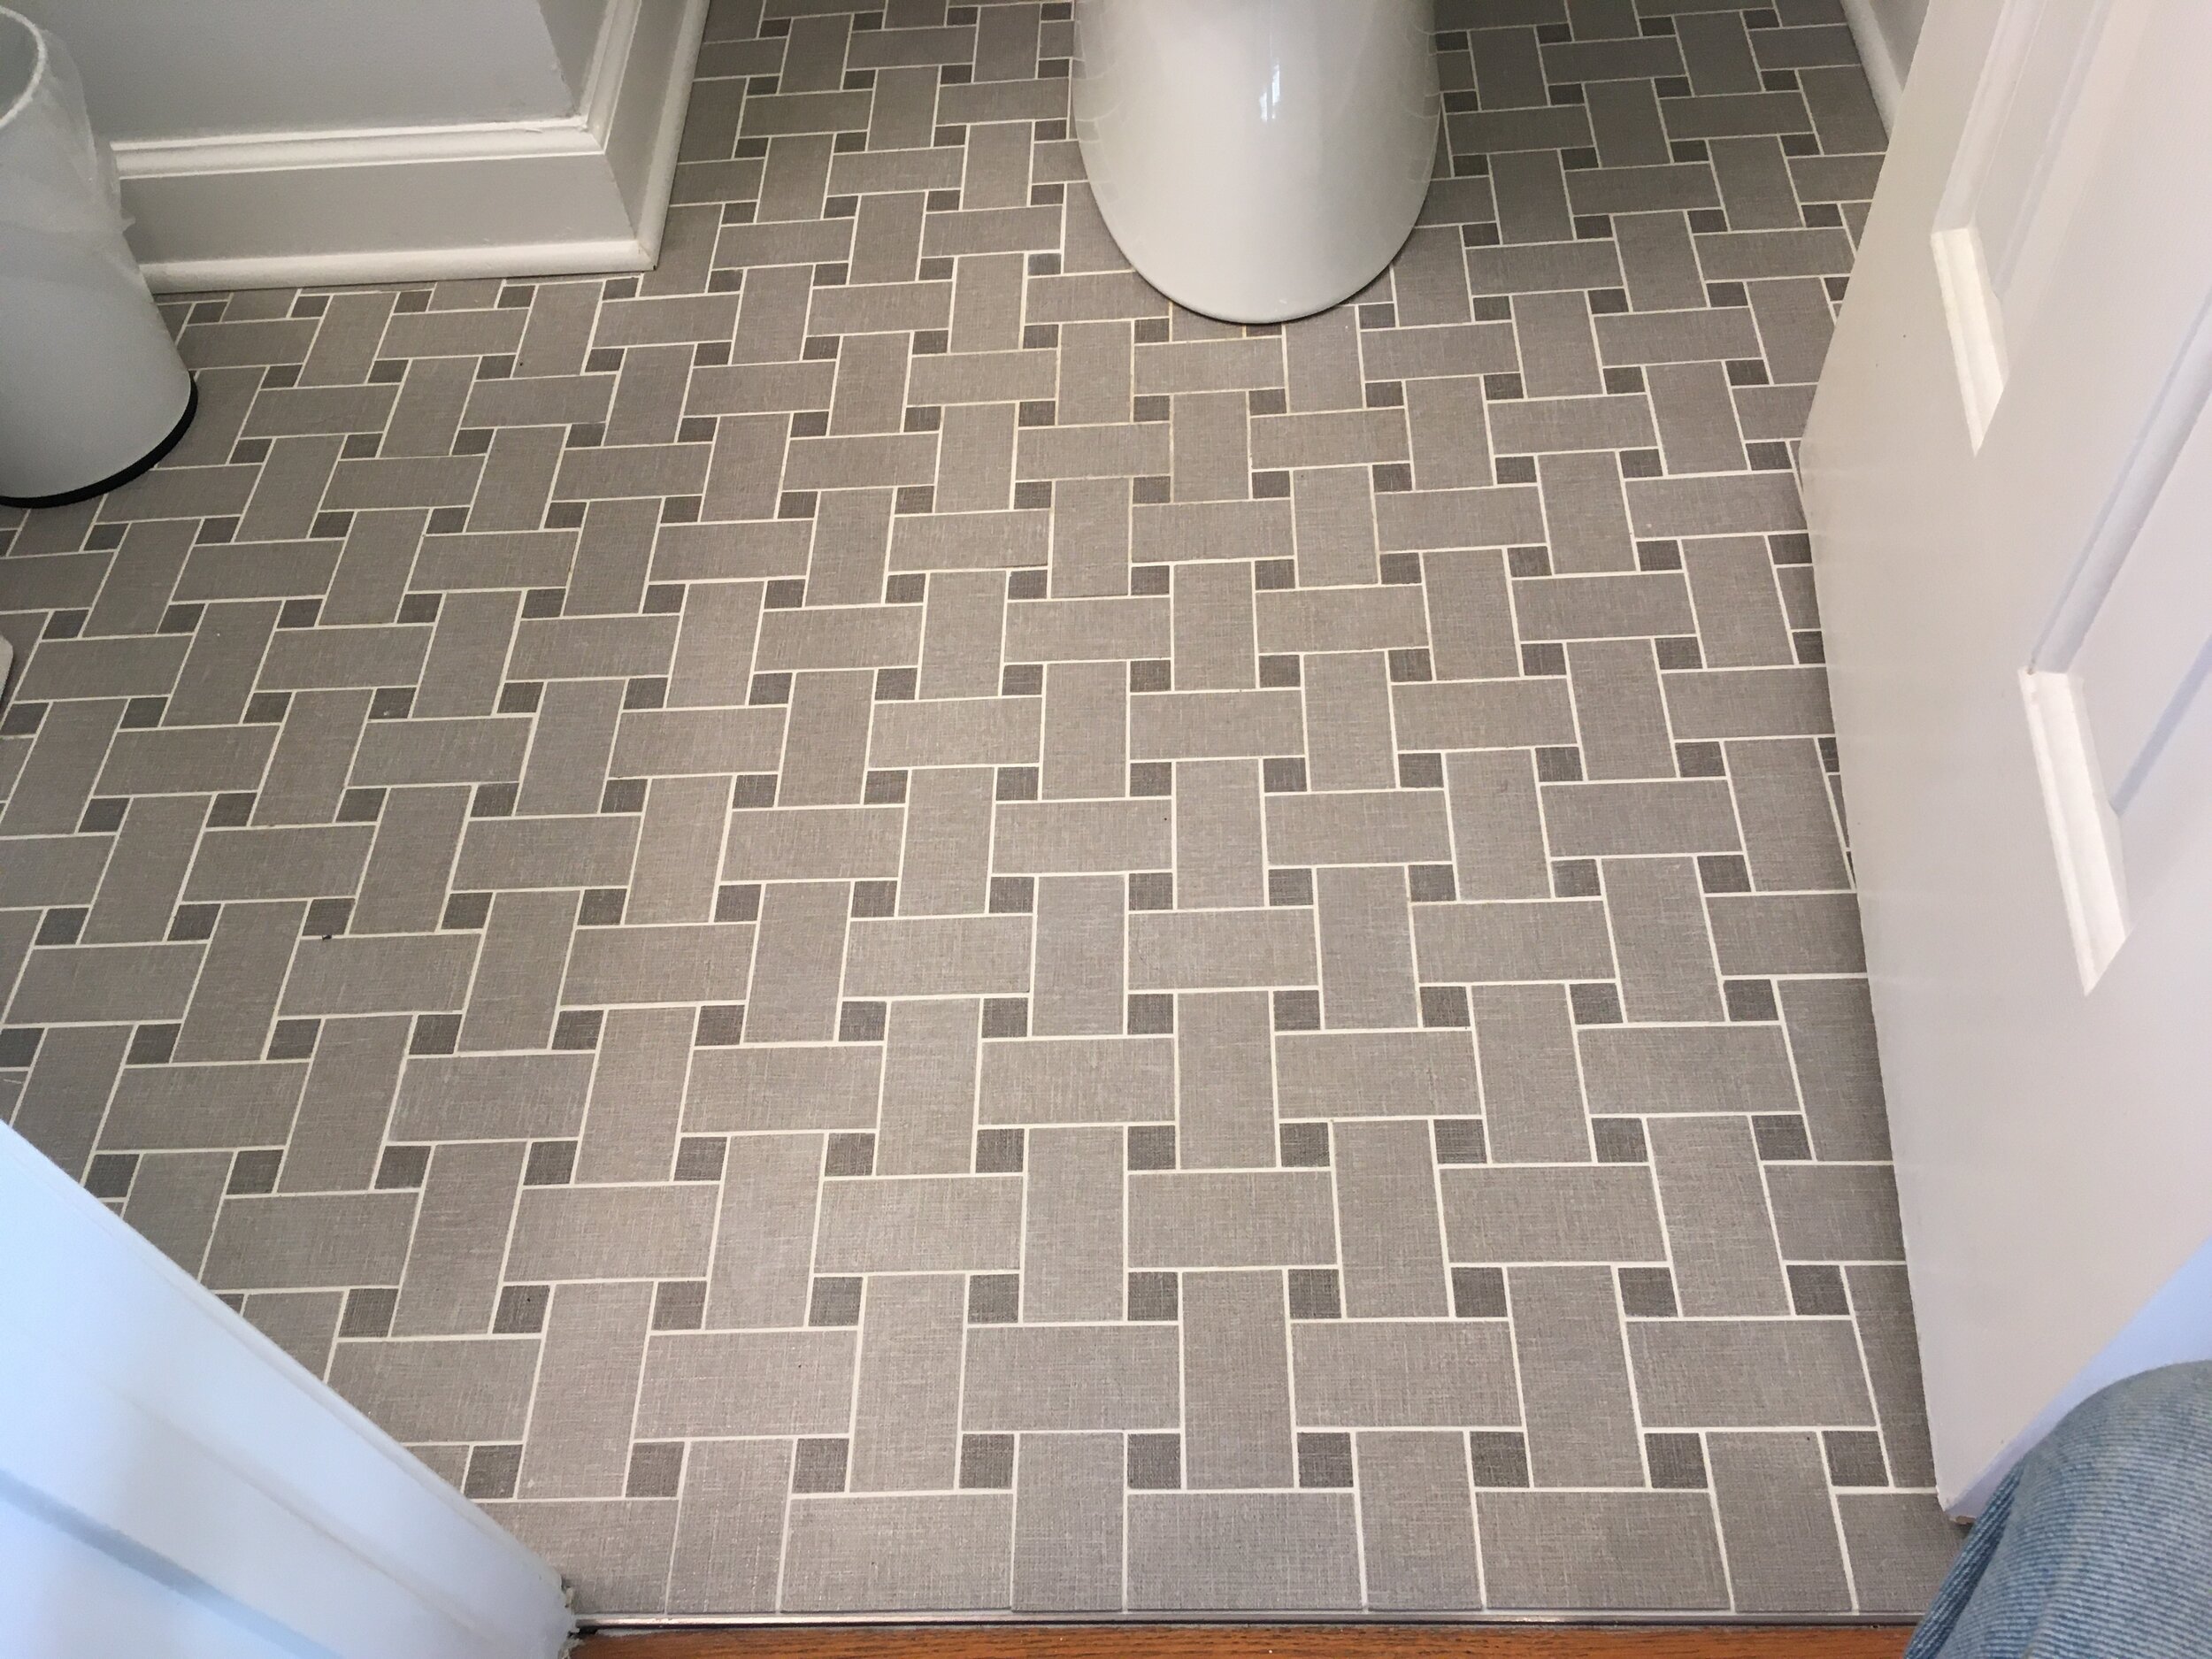  This is Euro Ceramic basket weaver tile installed with Mapie premixed grout. 